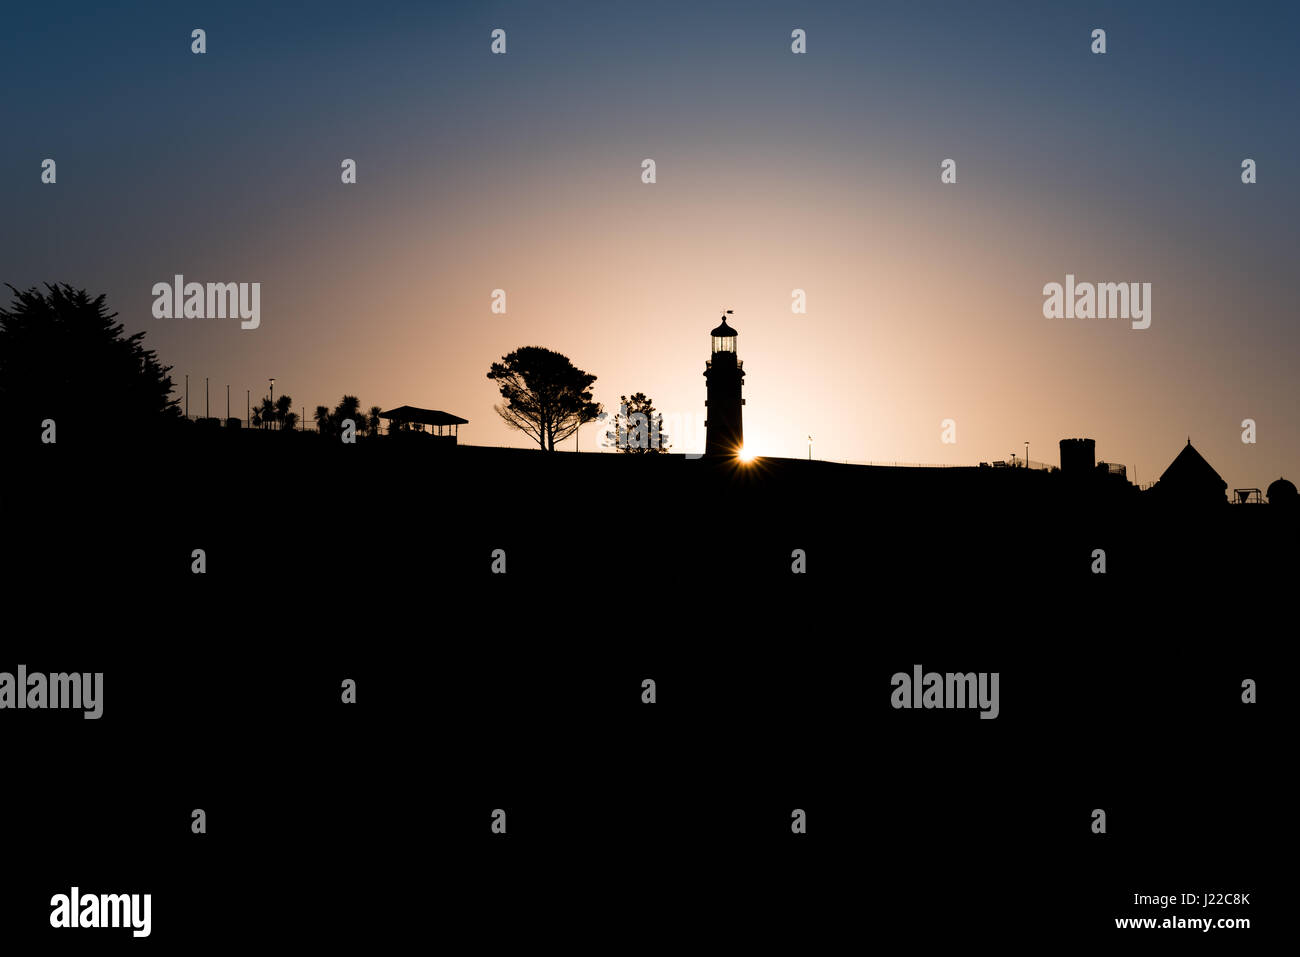 The iconic landmark, Smeatons Tower, stands out on the Plymouth Hoe skyline against the April dawn in Devon England. Stock Photo